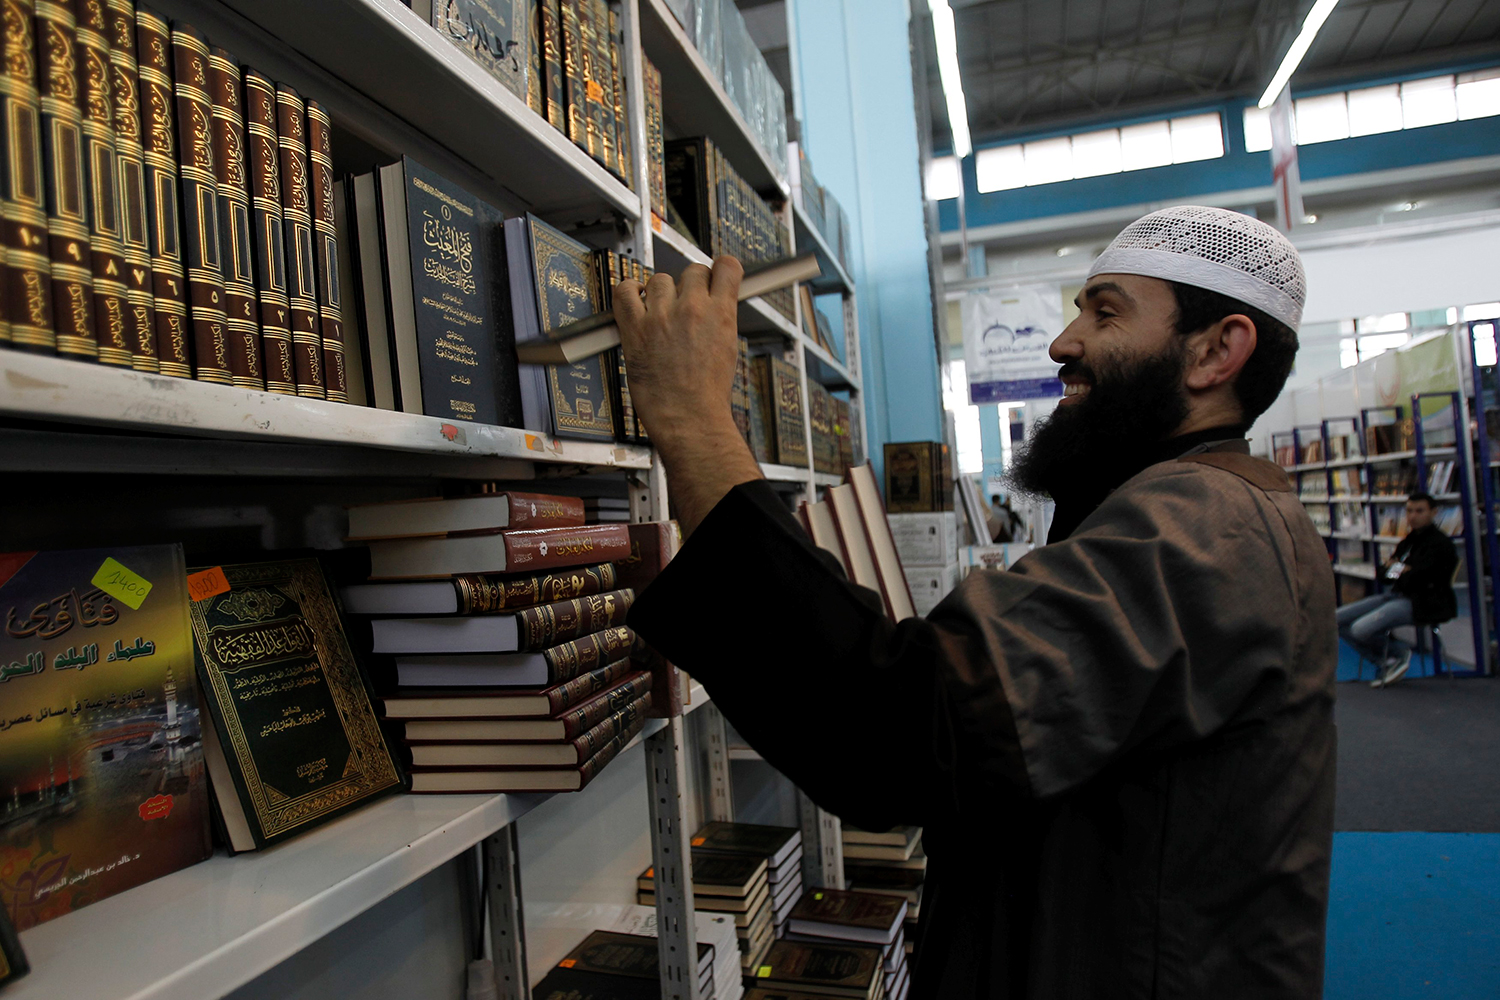 Over 100 books on Jihadism confiscated in Algiers Book Fair